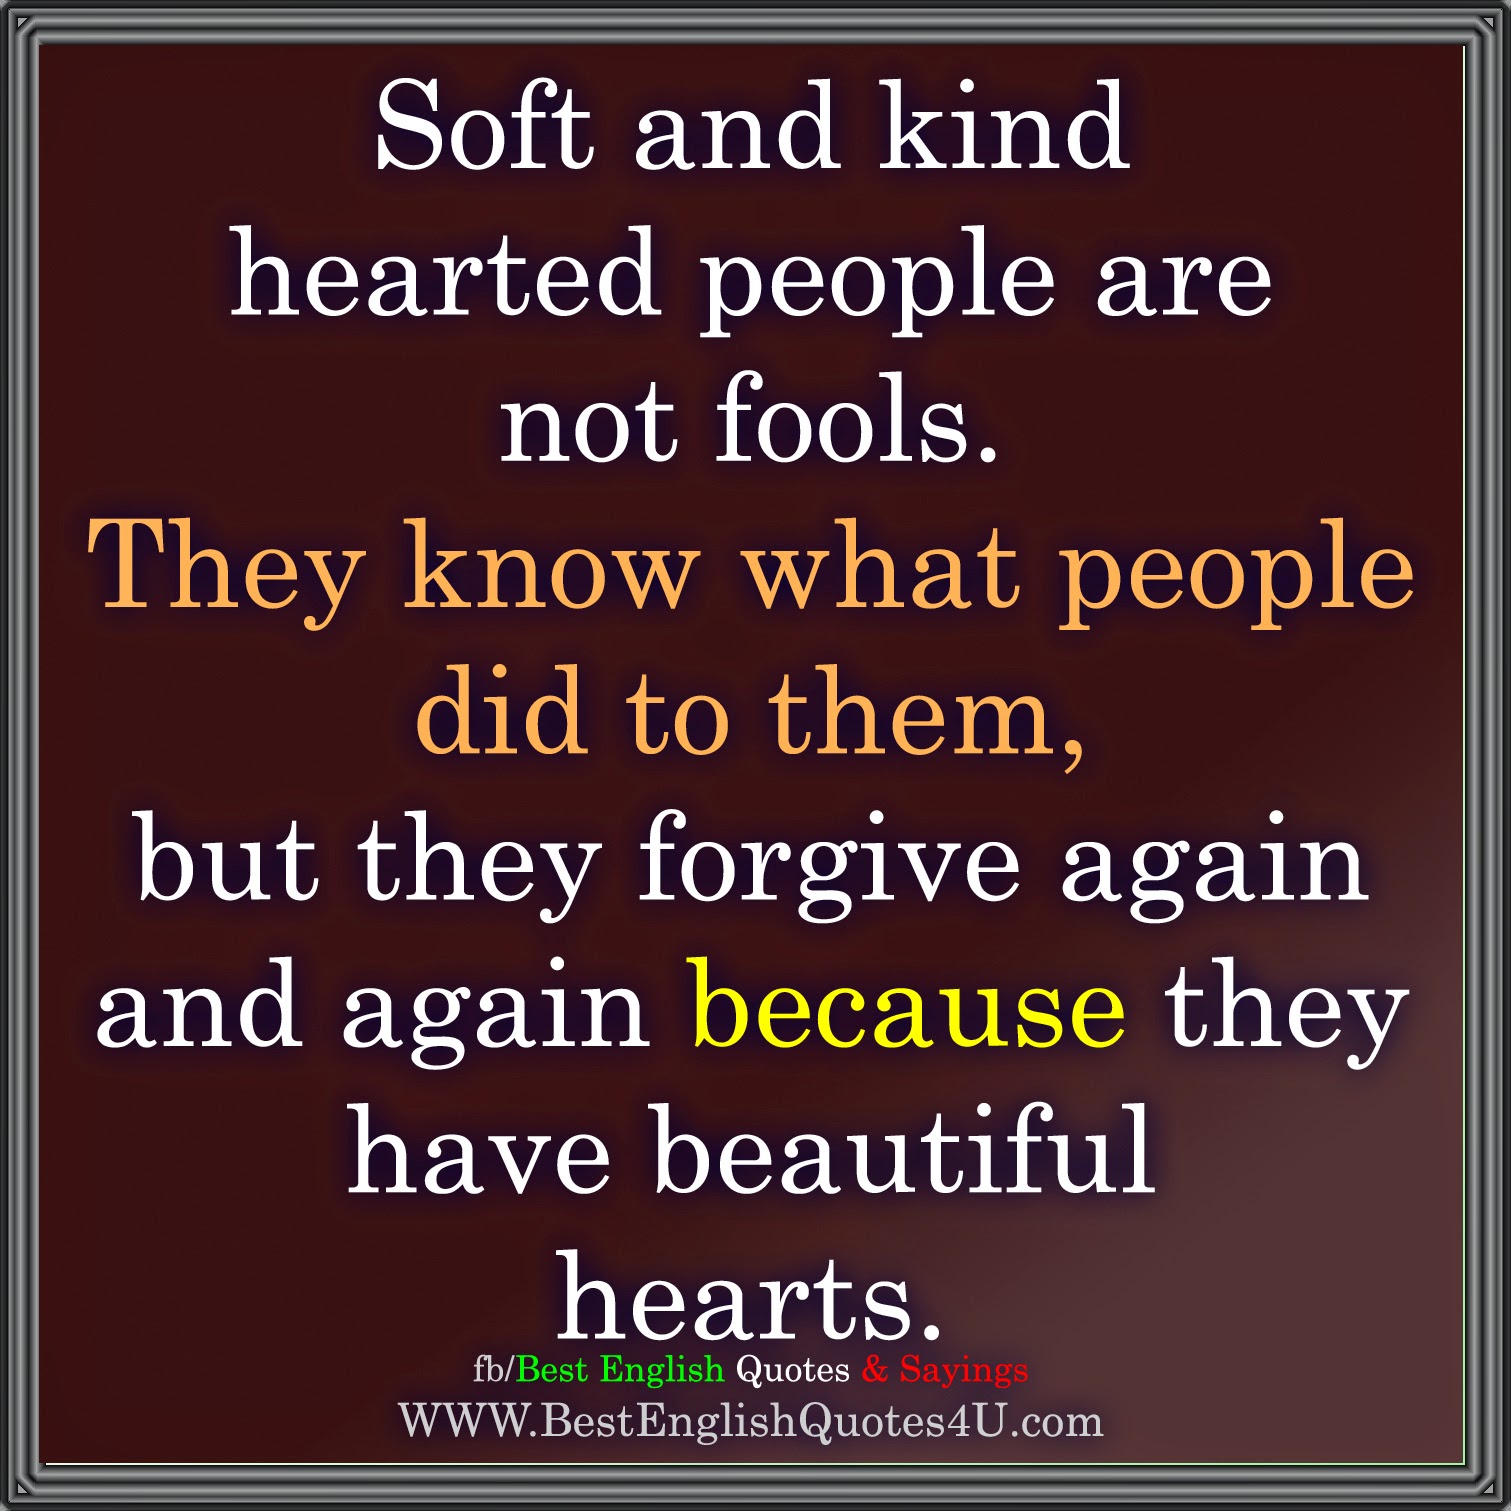 Soft and kind hearted people are not fools. | Best English Quotes & Sayings